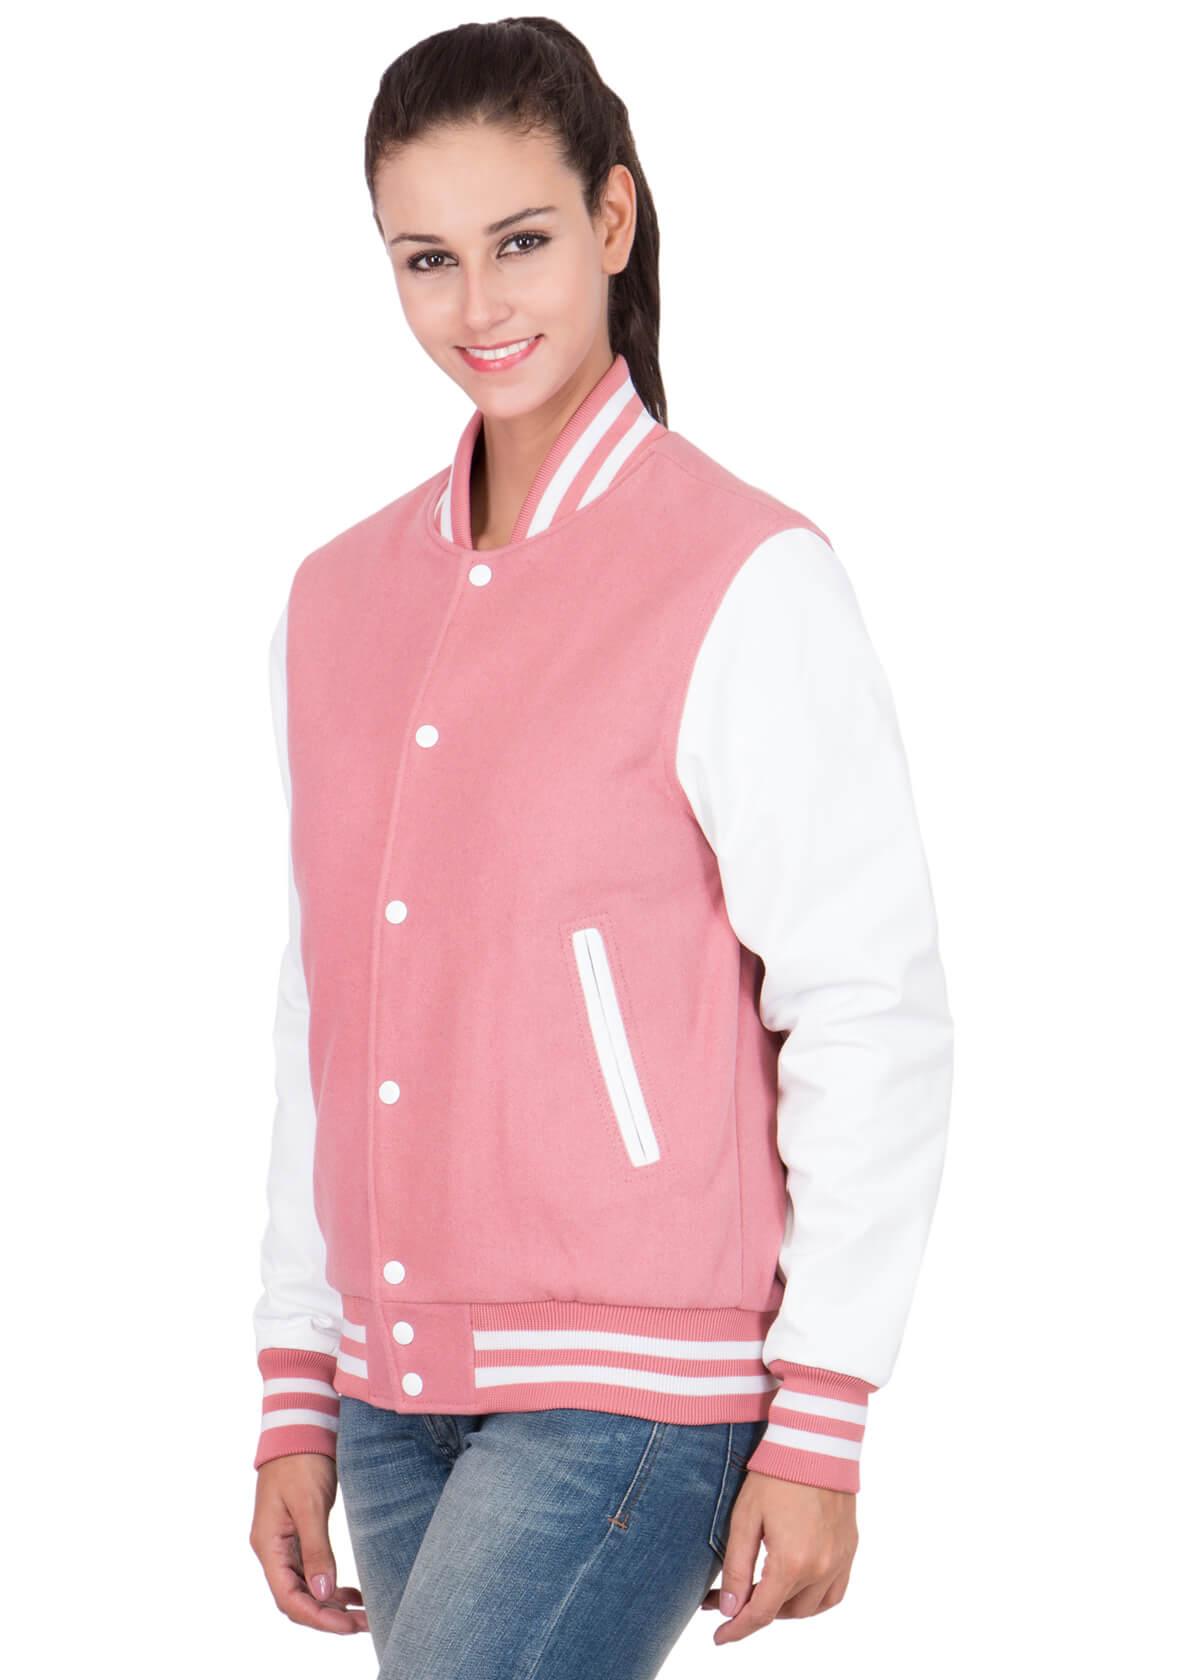 Pink Varsity Jacket Womens with White Leather Sleeves-2